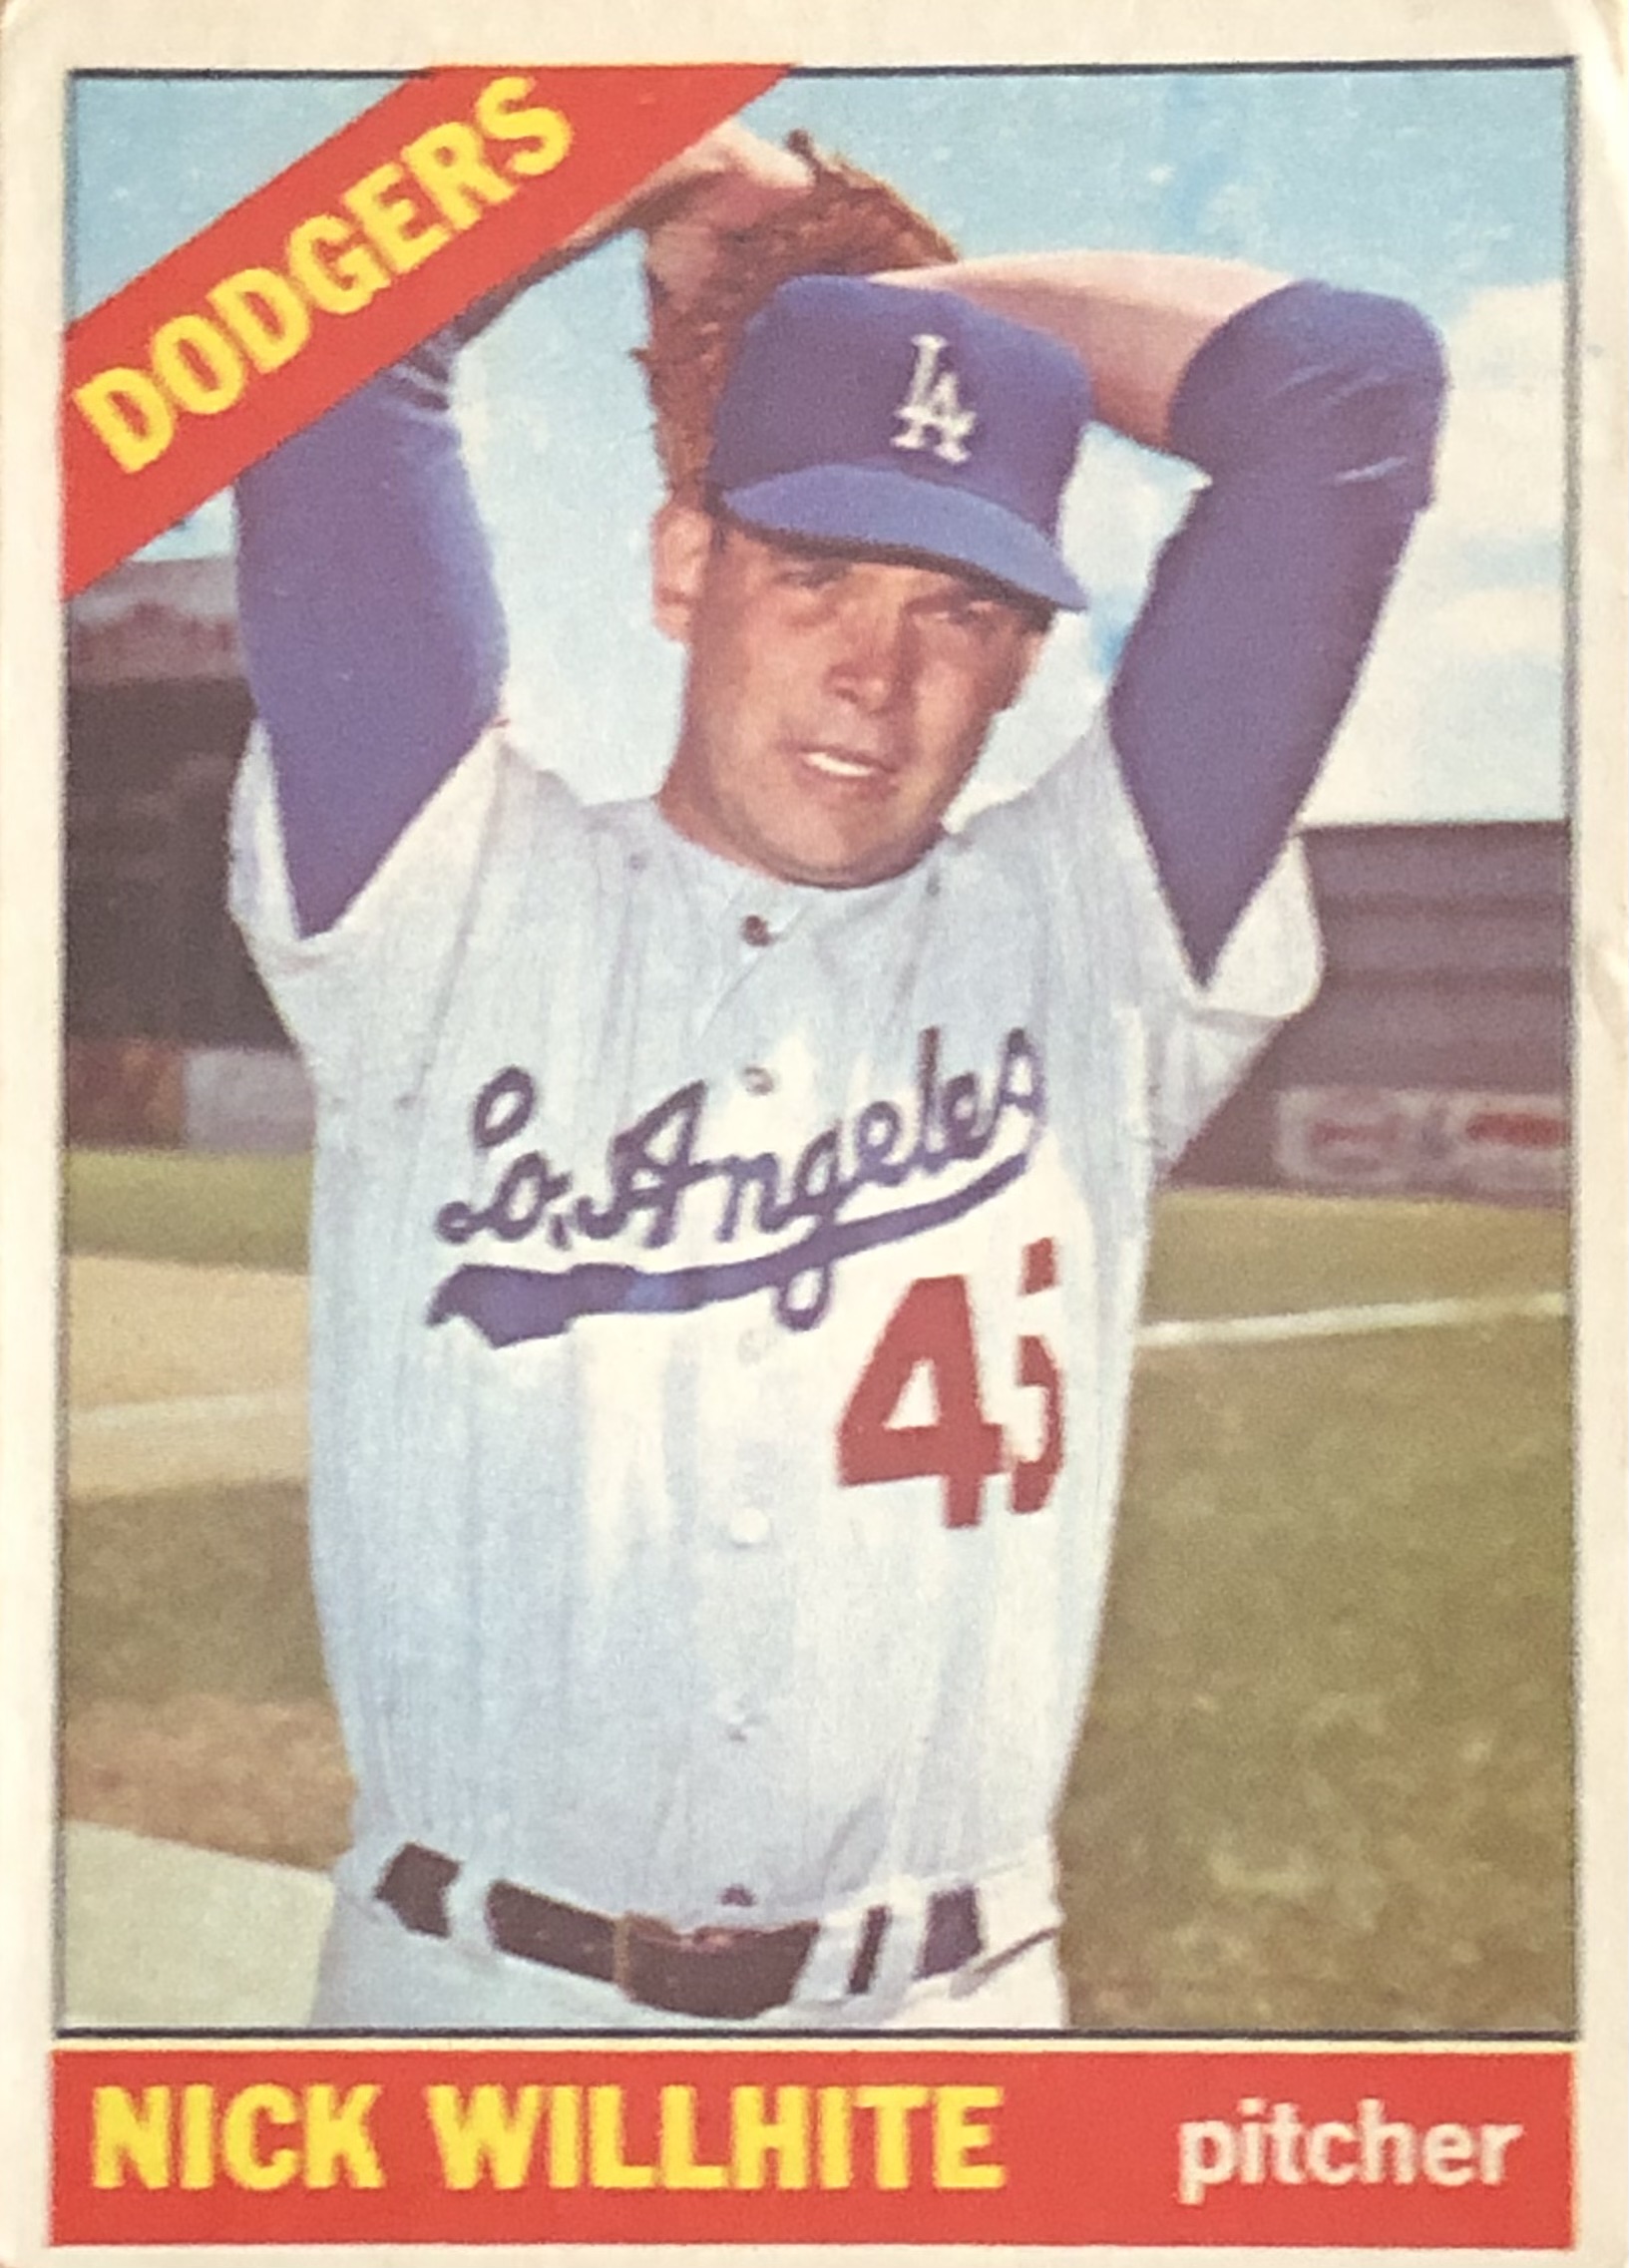 Dodgers left-hander Nick Willhite pitched a shutout in his major league debut, on June 16, 1963 against the Cubs at Dodger Stadium. Here is his 1966 Topps baseball card.